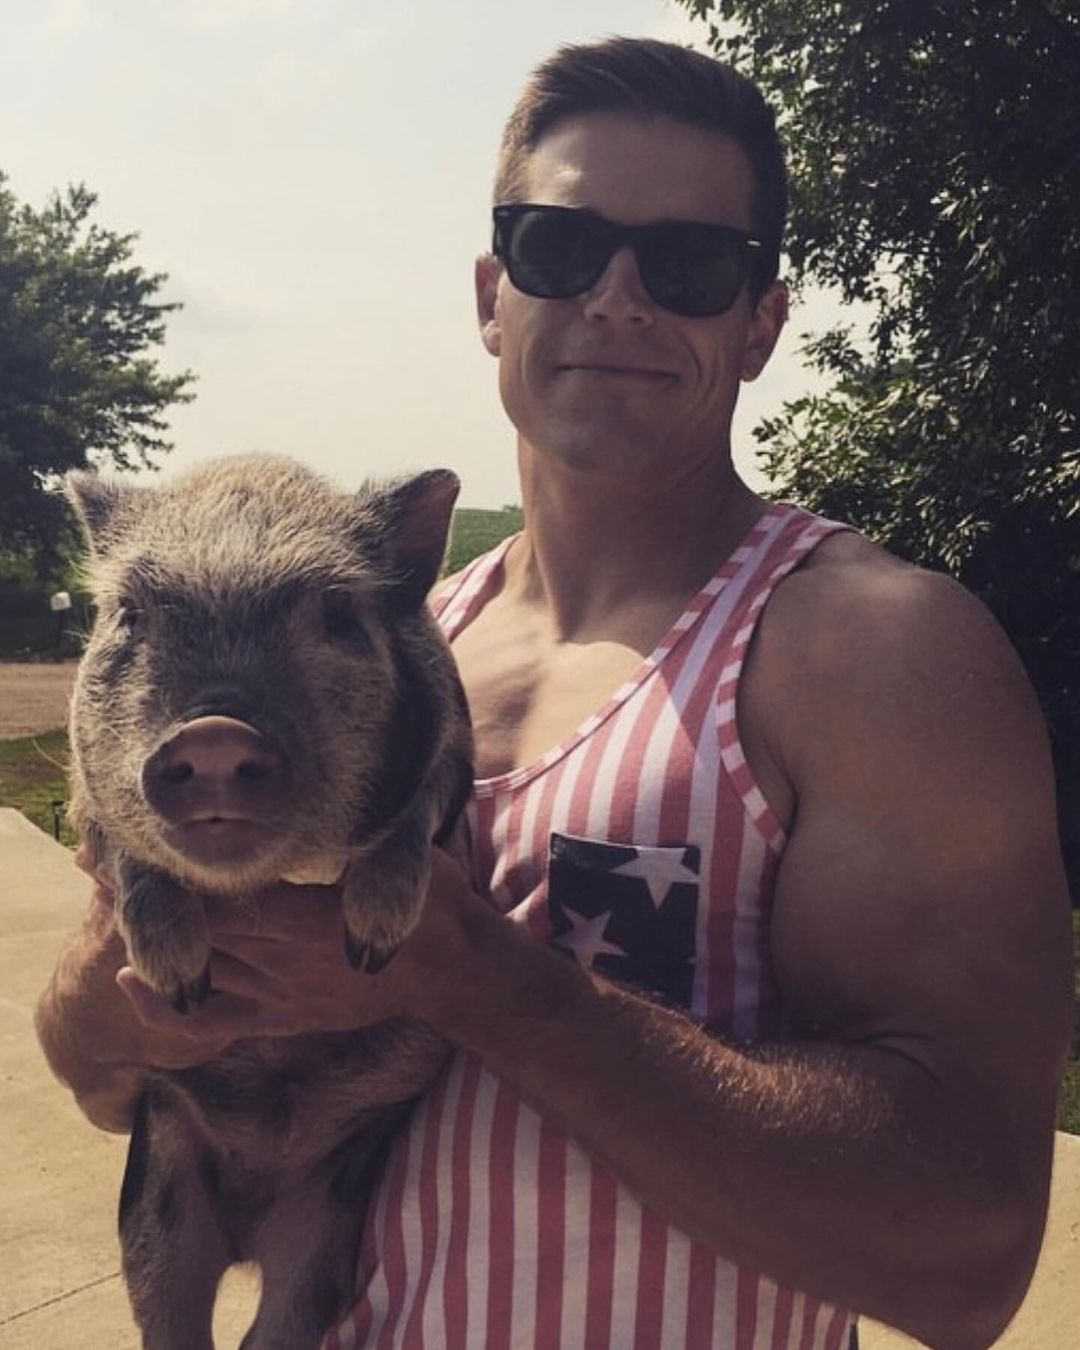 Cole also posted about Pete on Sunday, sharing a photo of himself holding the pig on Instagram